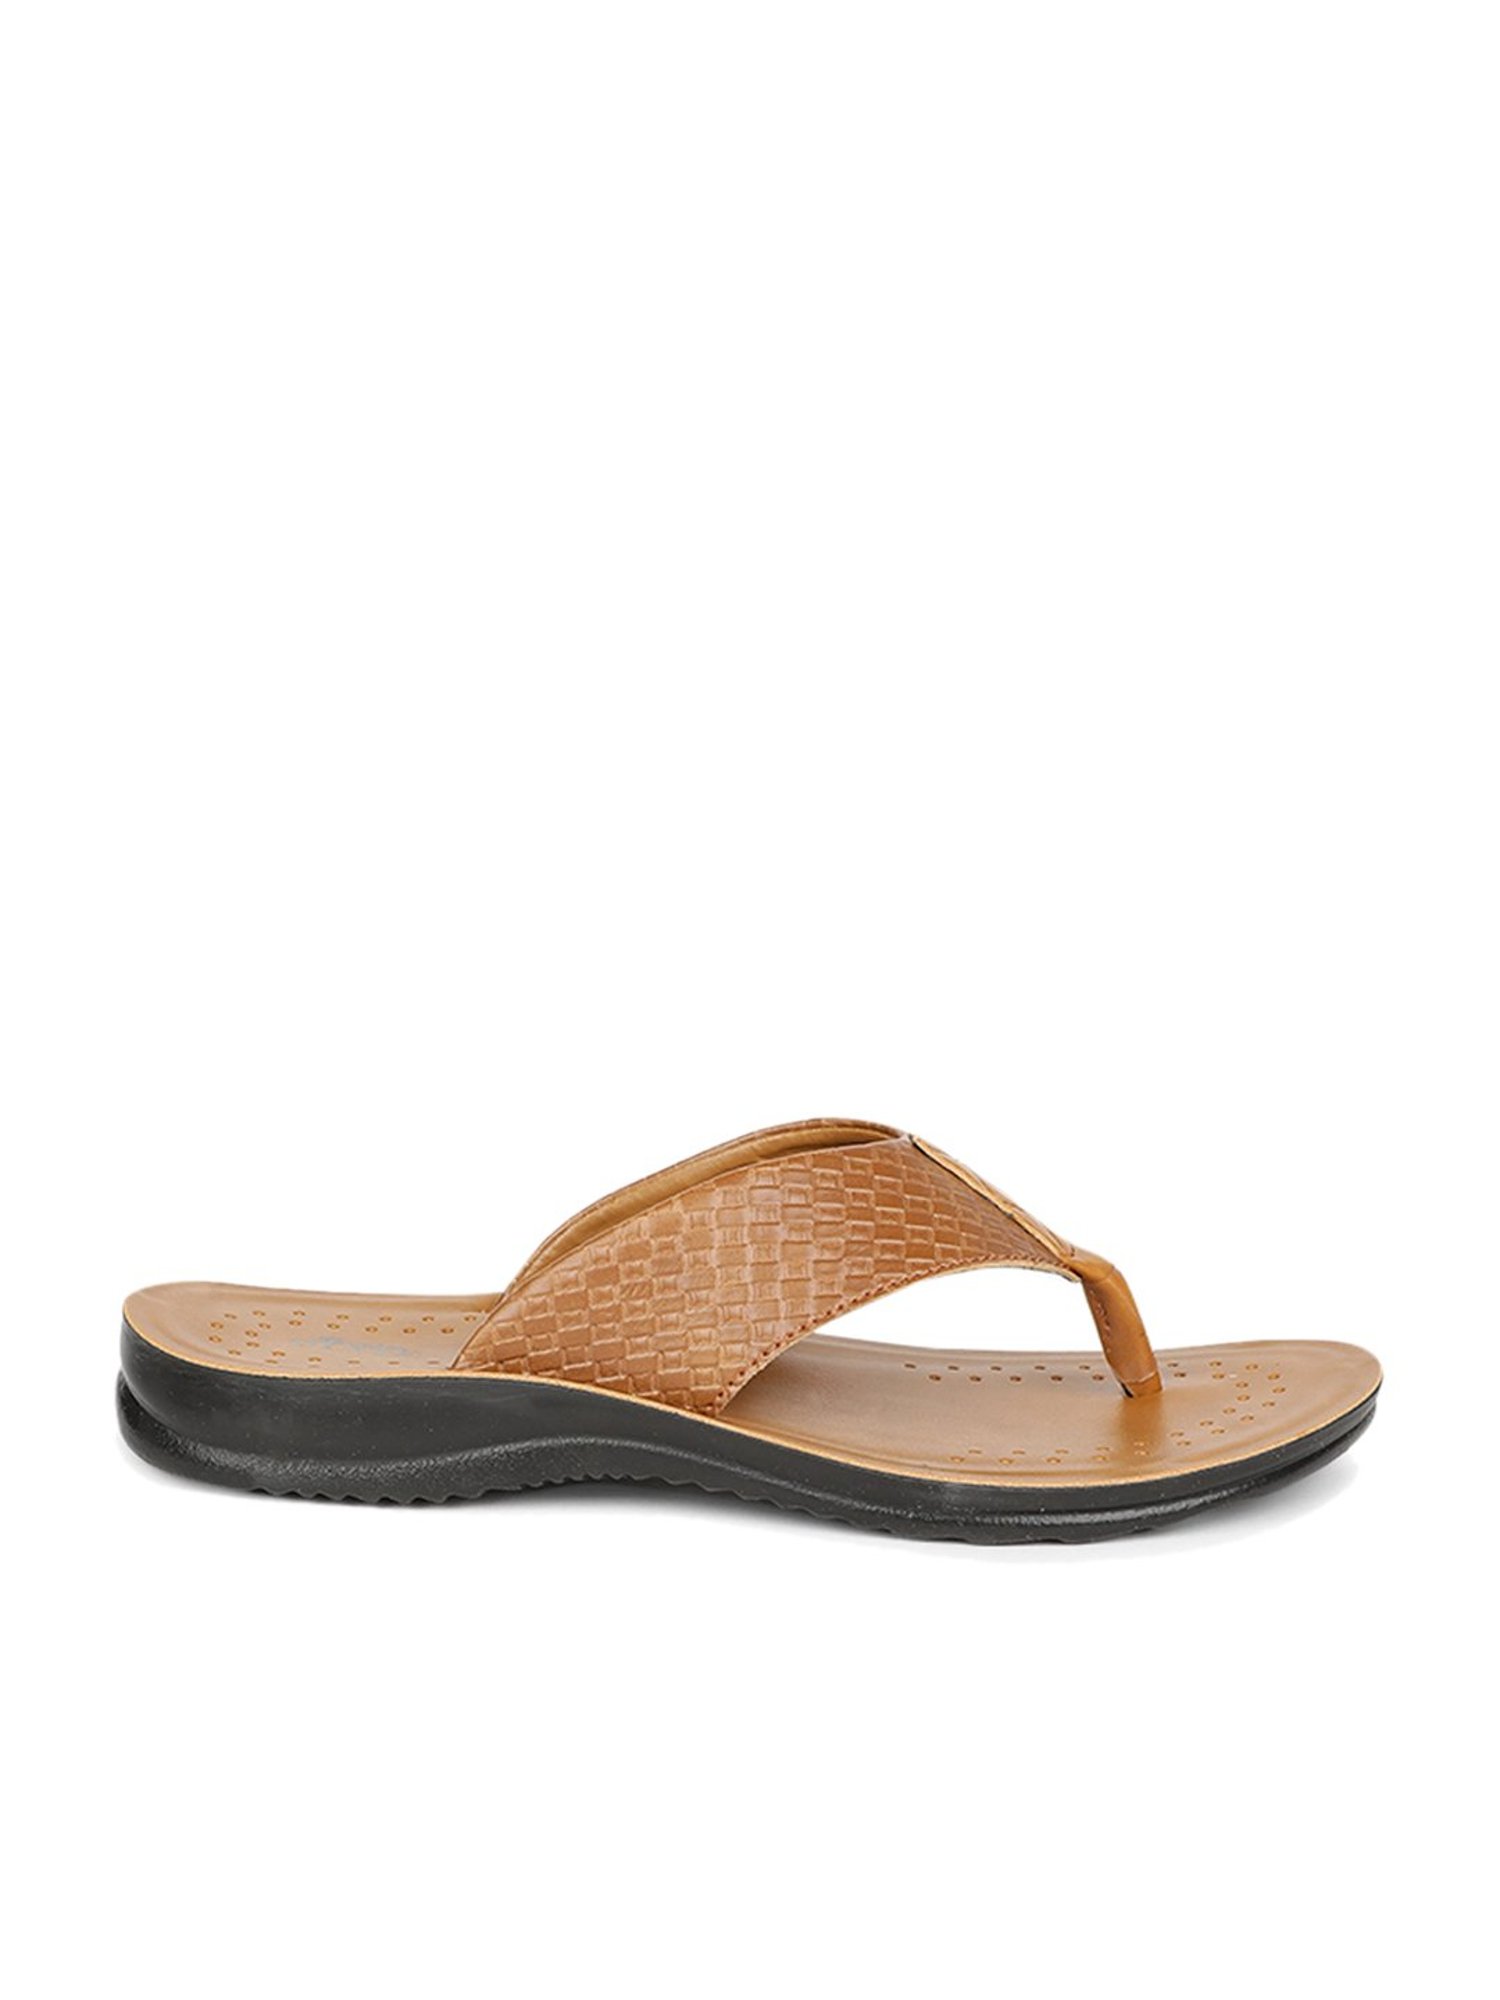 Bata Red Label Black Flat Sandals For Women [6] in Palghar at best price by  Style King Footwear - Justdial